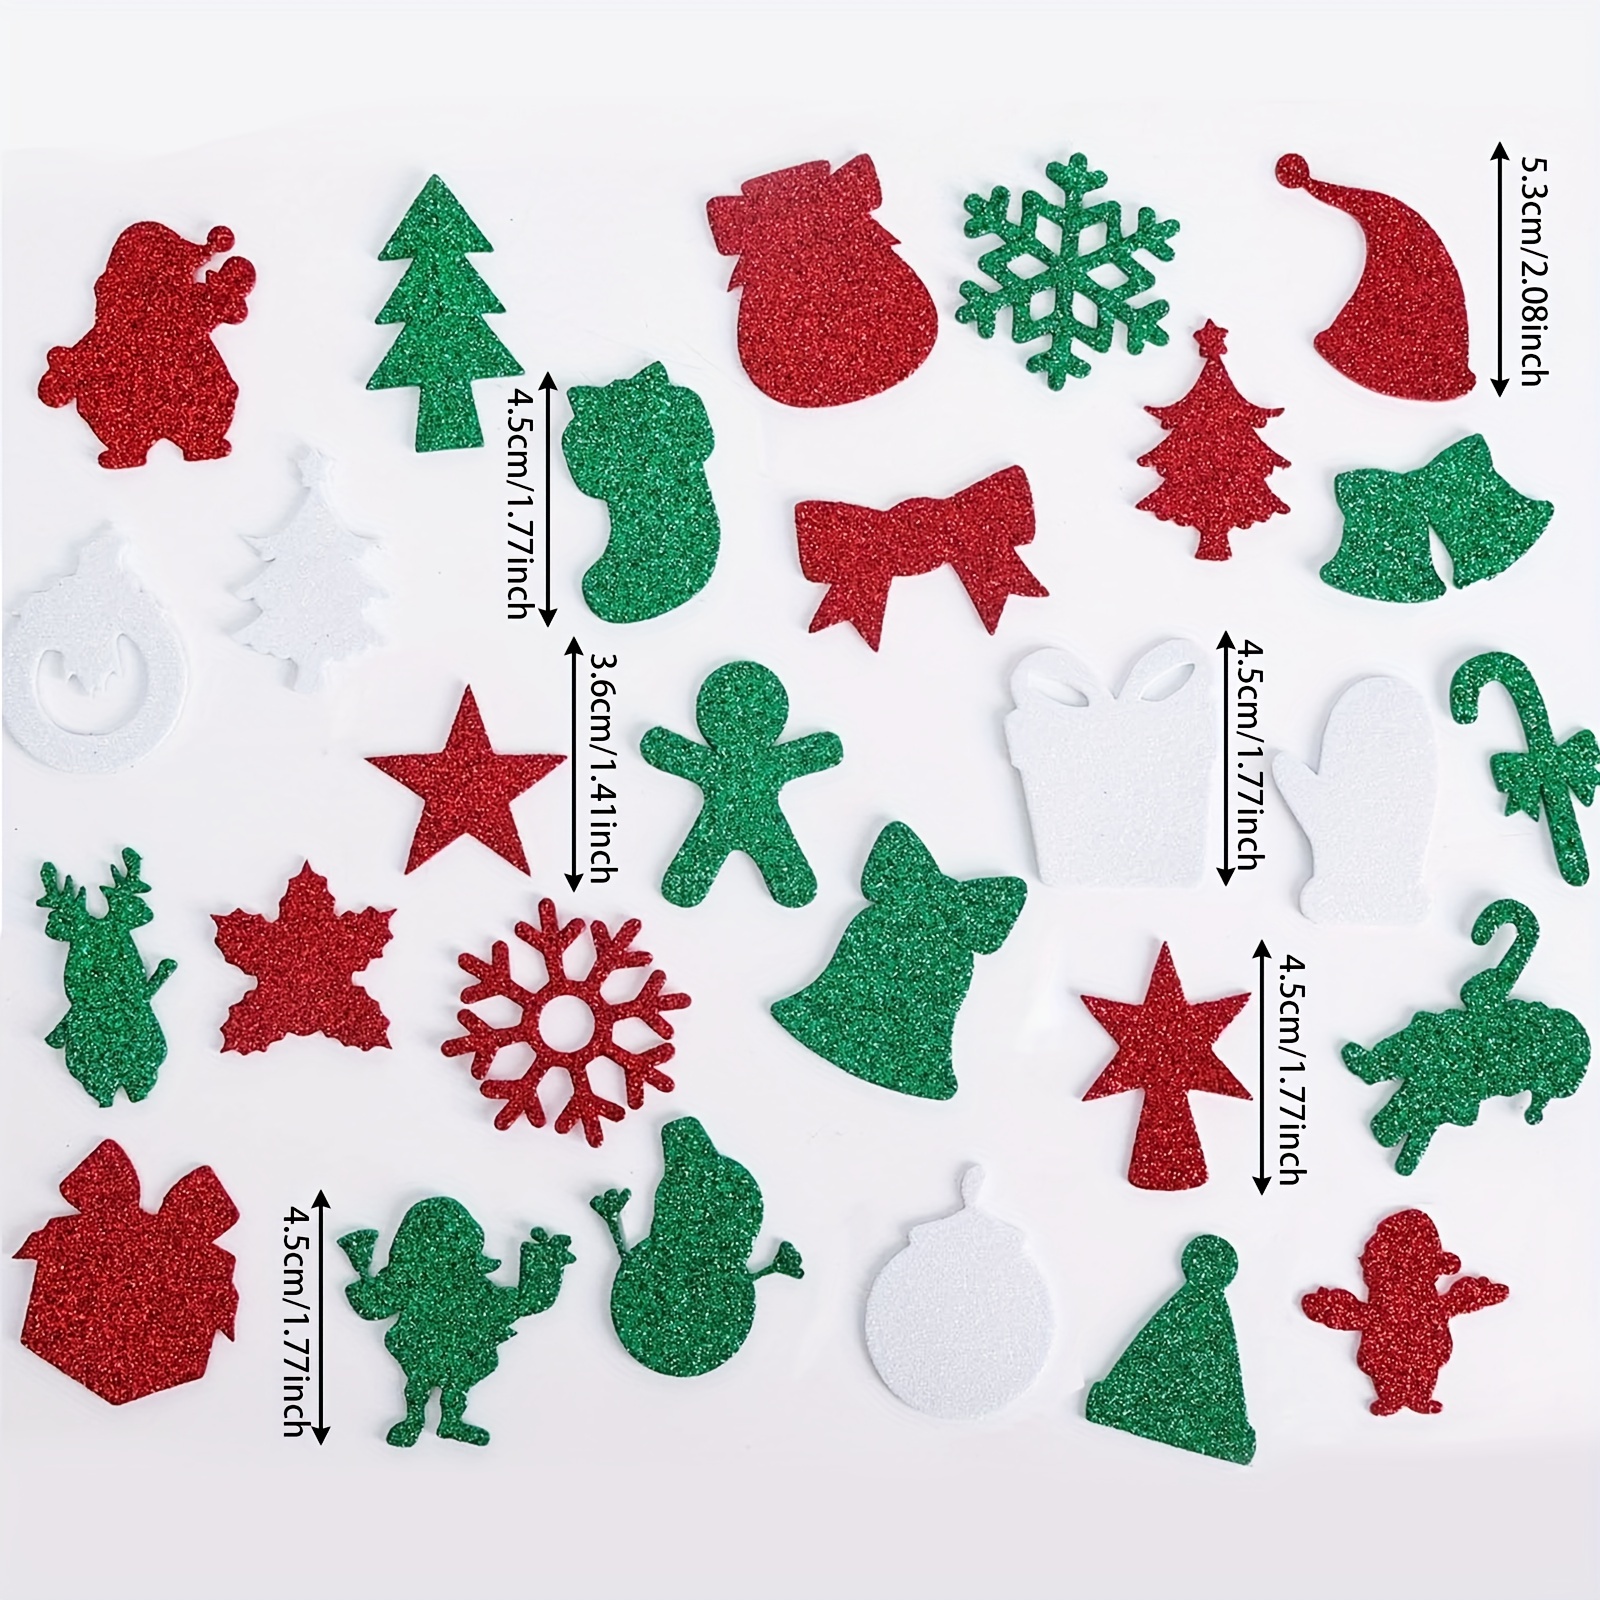  Topbuti 330 Pieces Christmas Glitter Foam Stickers Self  Adhesive Snowflake Star Santa Bell Tree Gloves Candy Cane Xmas Theme Shapes  Sticker for Christmas Gift Box Bag Arts Craft Supplies Greeting Cards